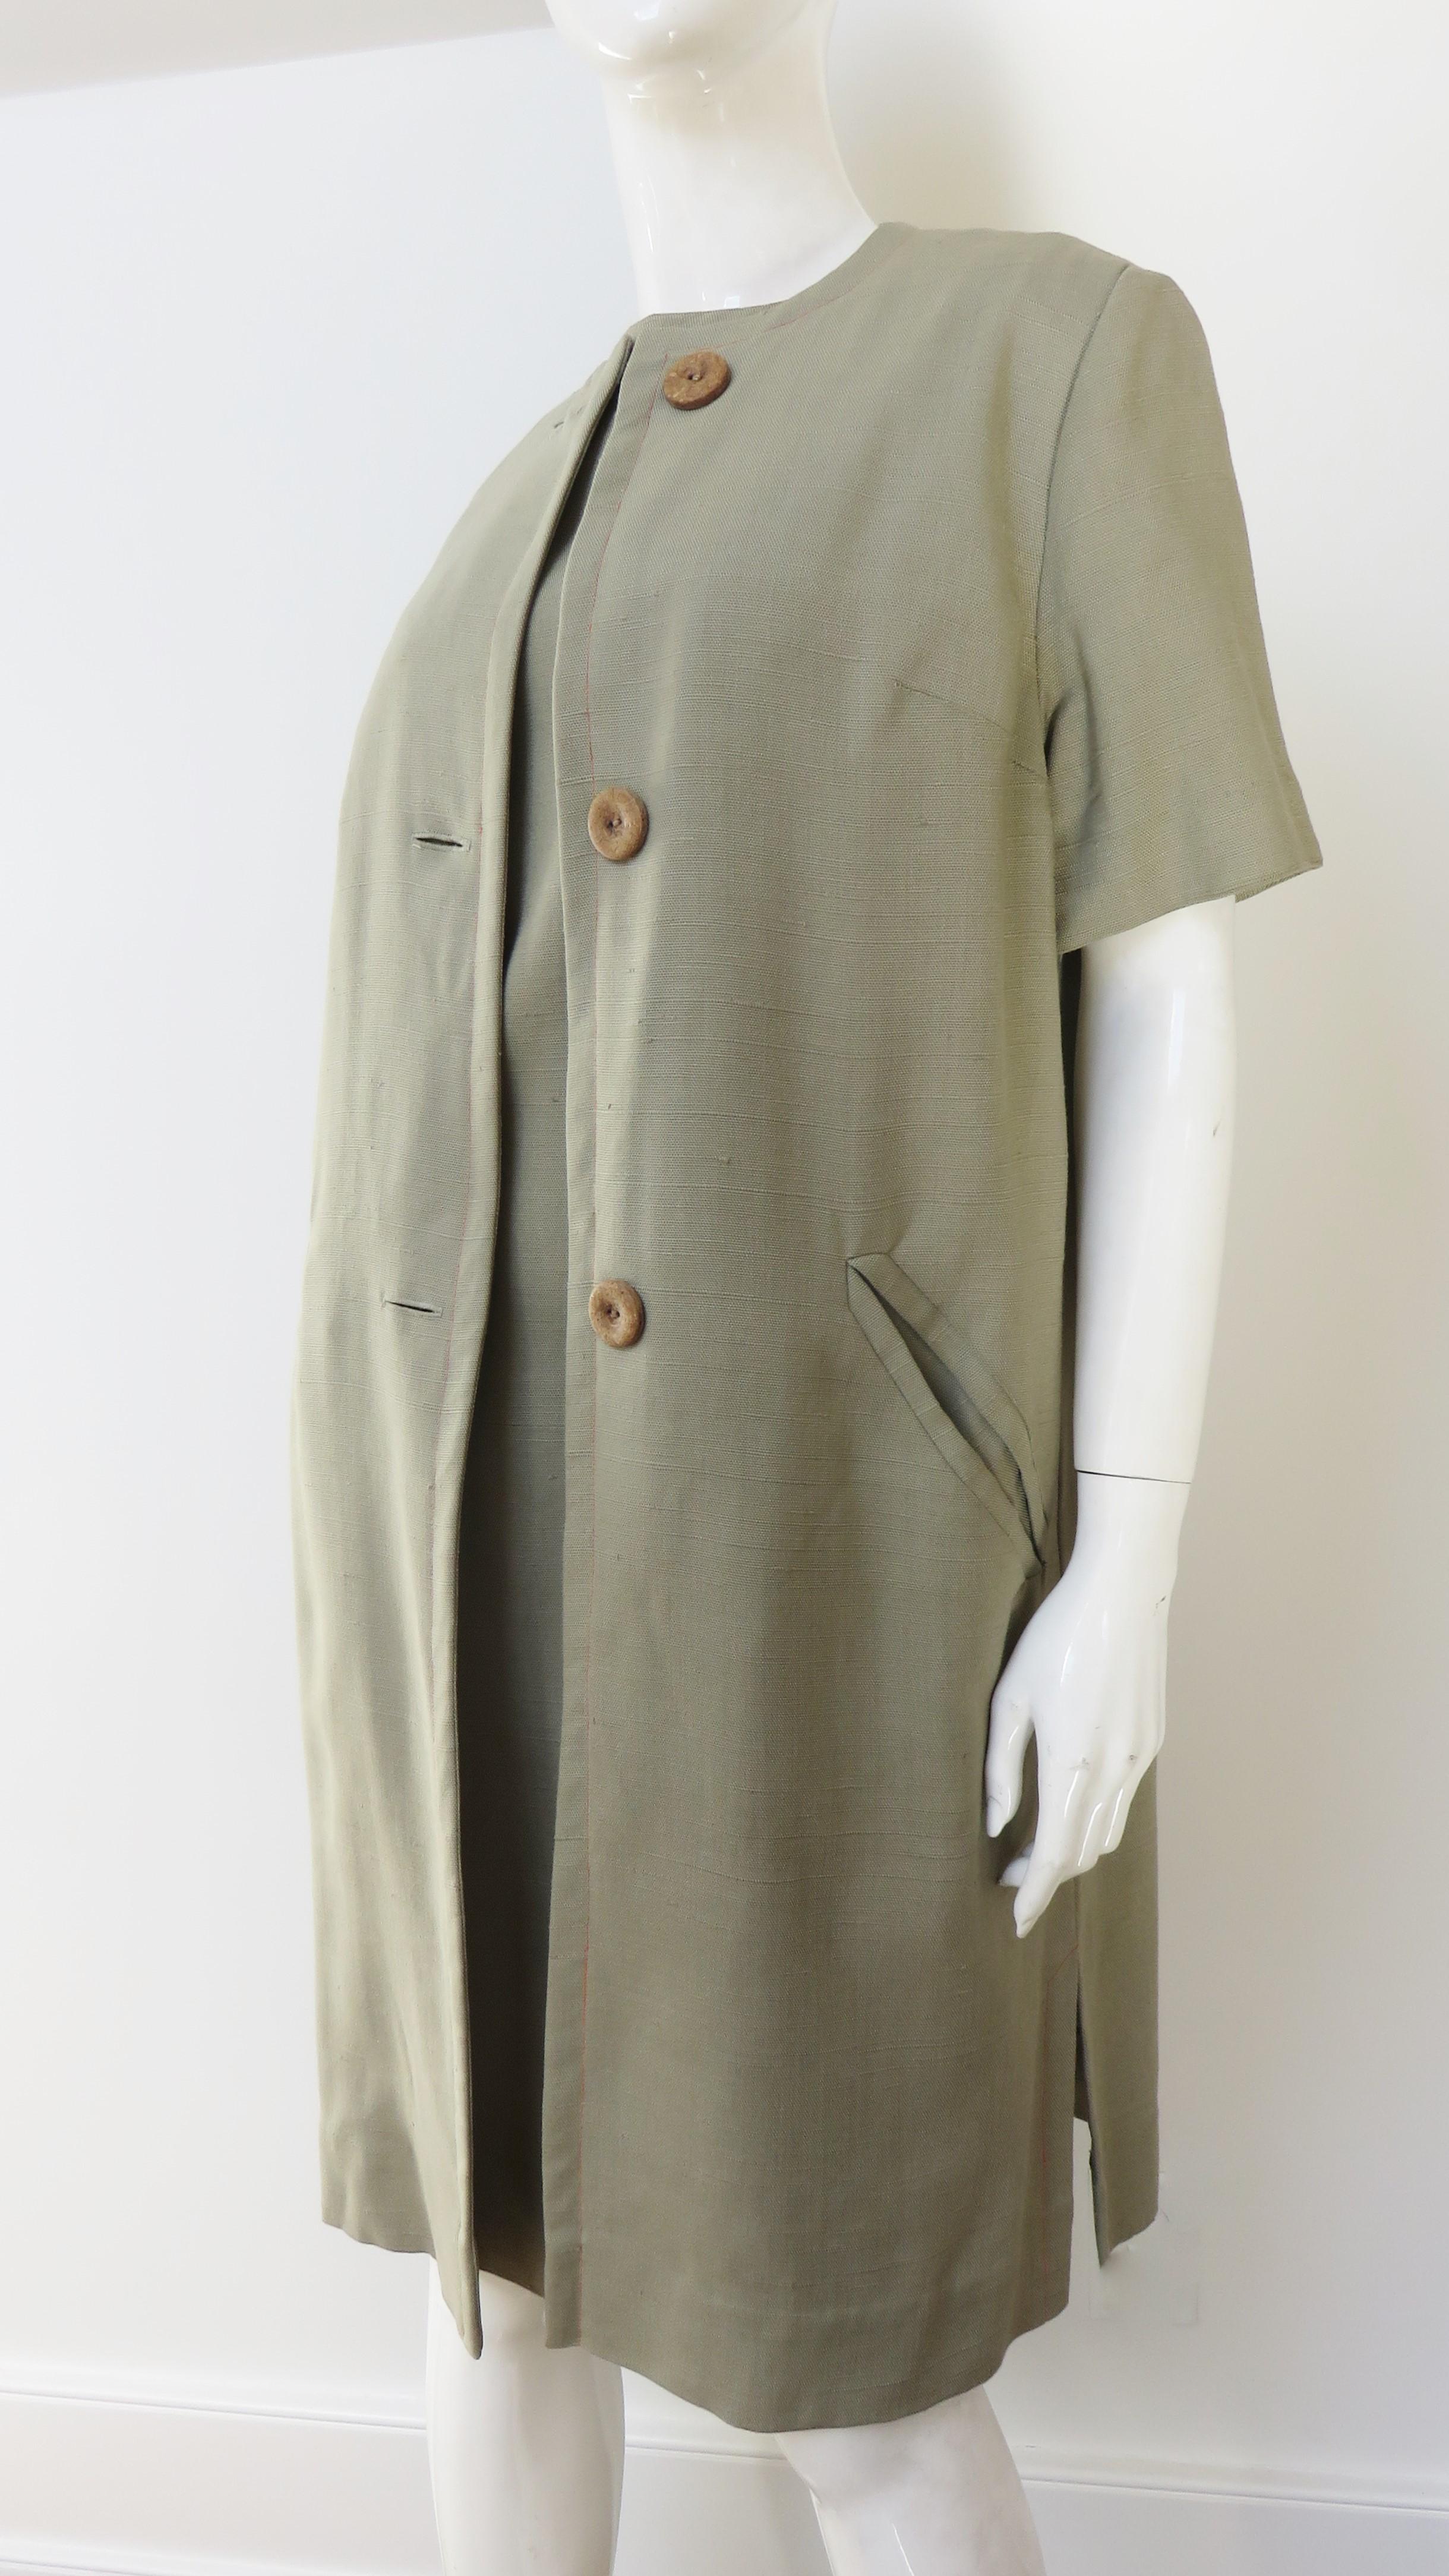 A fabulous khaki linen dress and coat set by Minx Modes. The shift dress is sleeveless with a front yoke, back kick pleat and contrasting orange topstitching.  The matching jacket has short sleeves, front welt pockets, front buttons and slits at the